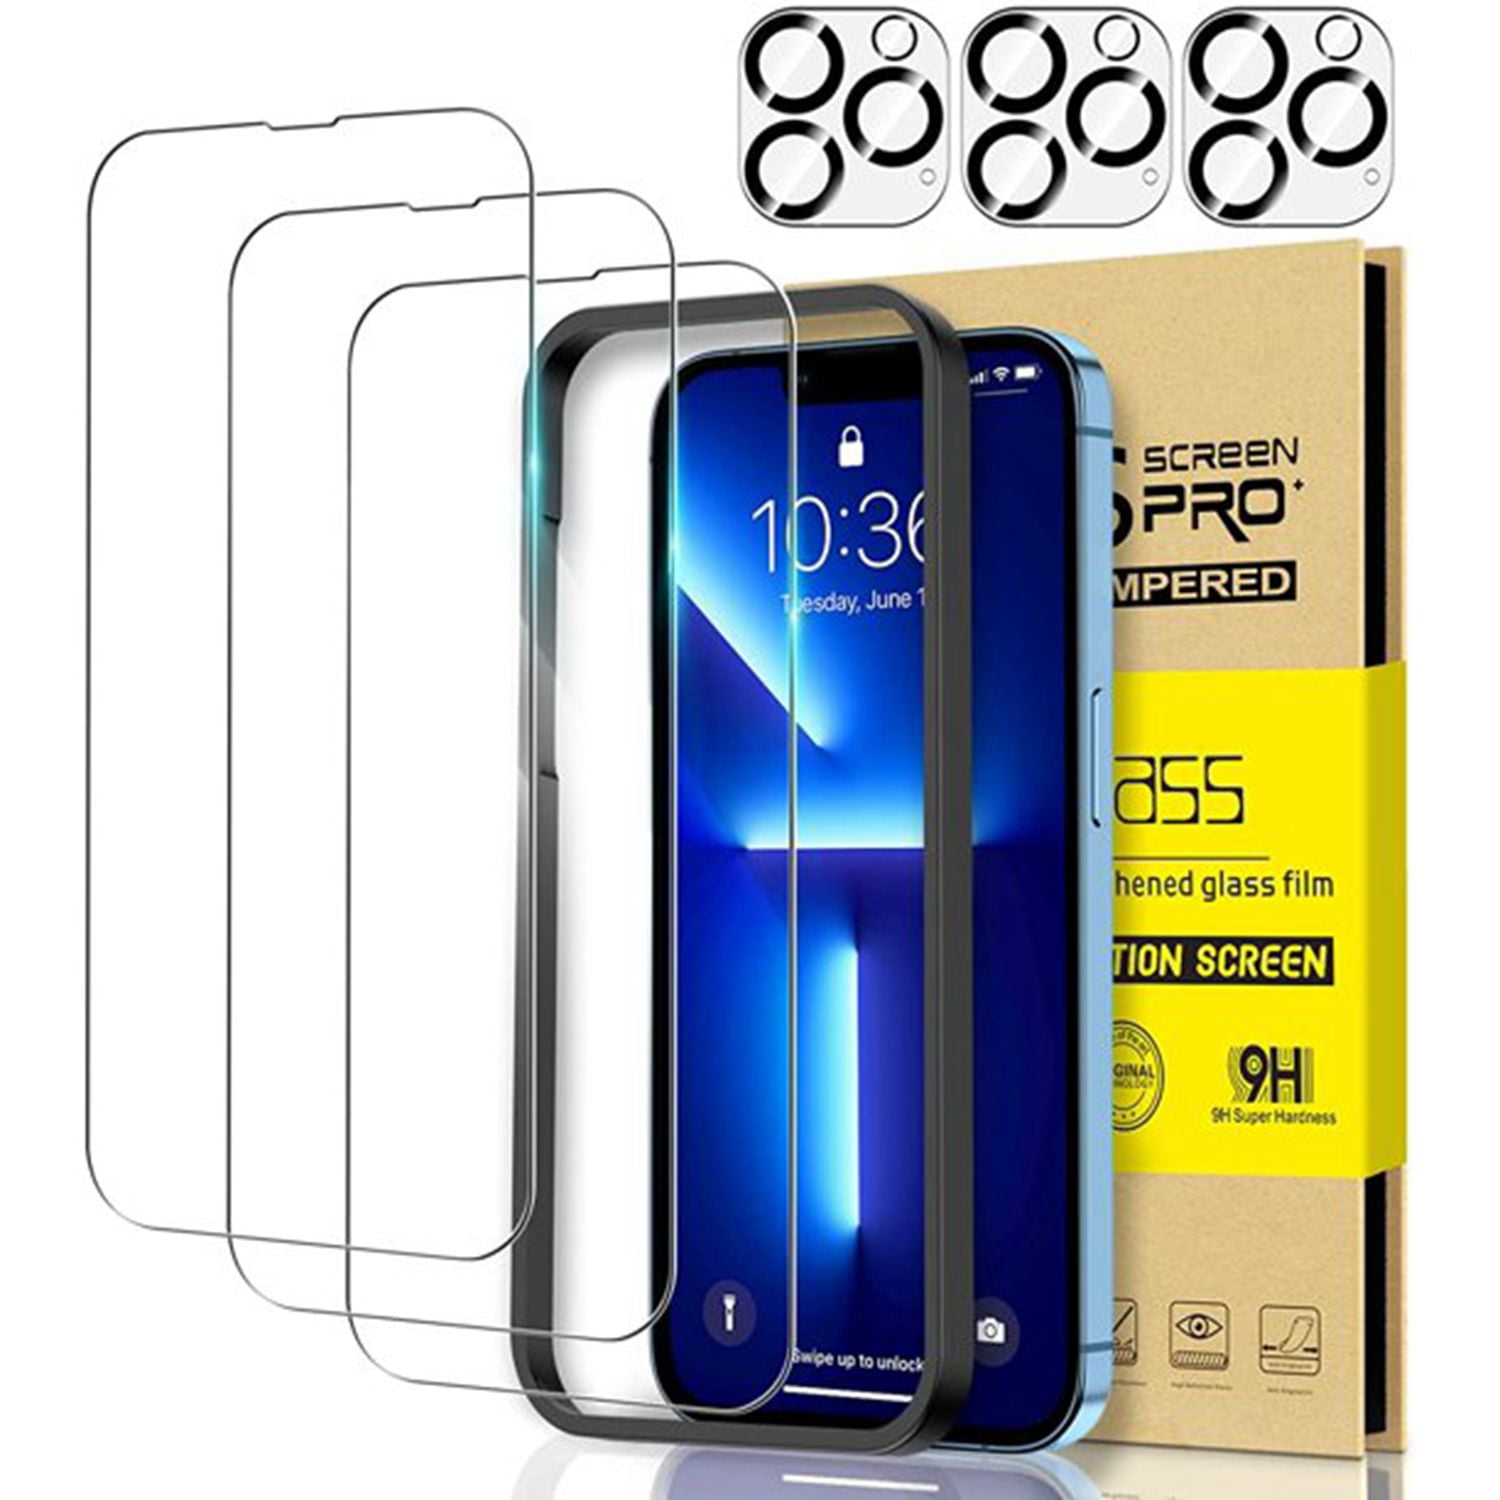 Premium 10D Tempered Glass Full Cover Film Protector For Phone For IPhone  Models: IPhone 15, 14, 13 Pro Max, 12 Mini, 11, XS, XDR, 8, 7, 6 Plus, And  SE From Fastcharger2017, $0.36